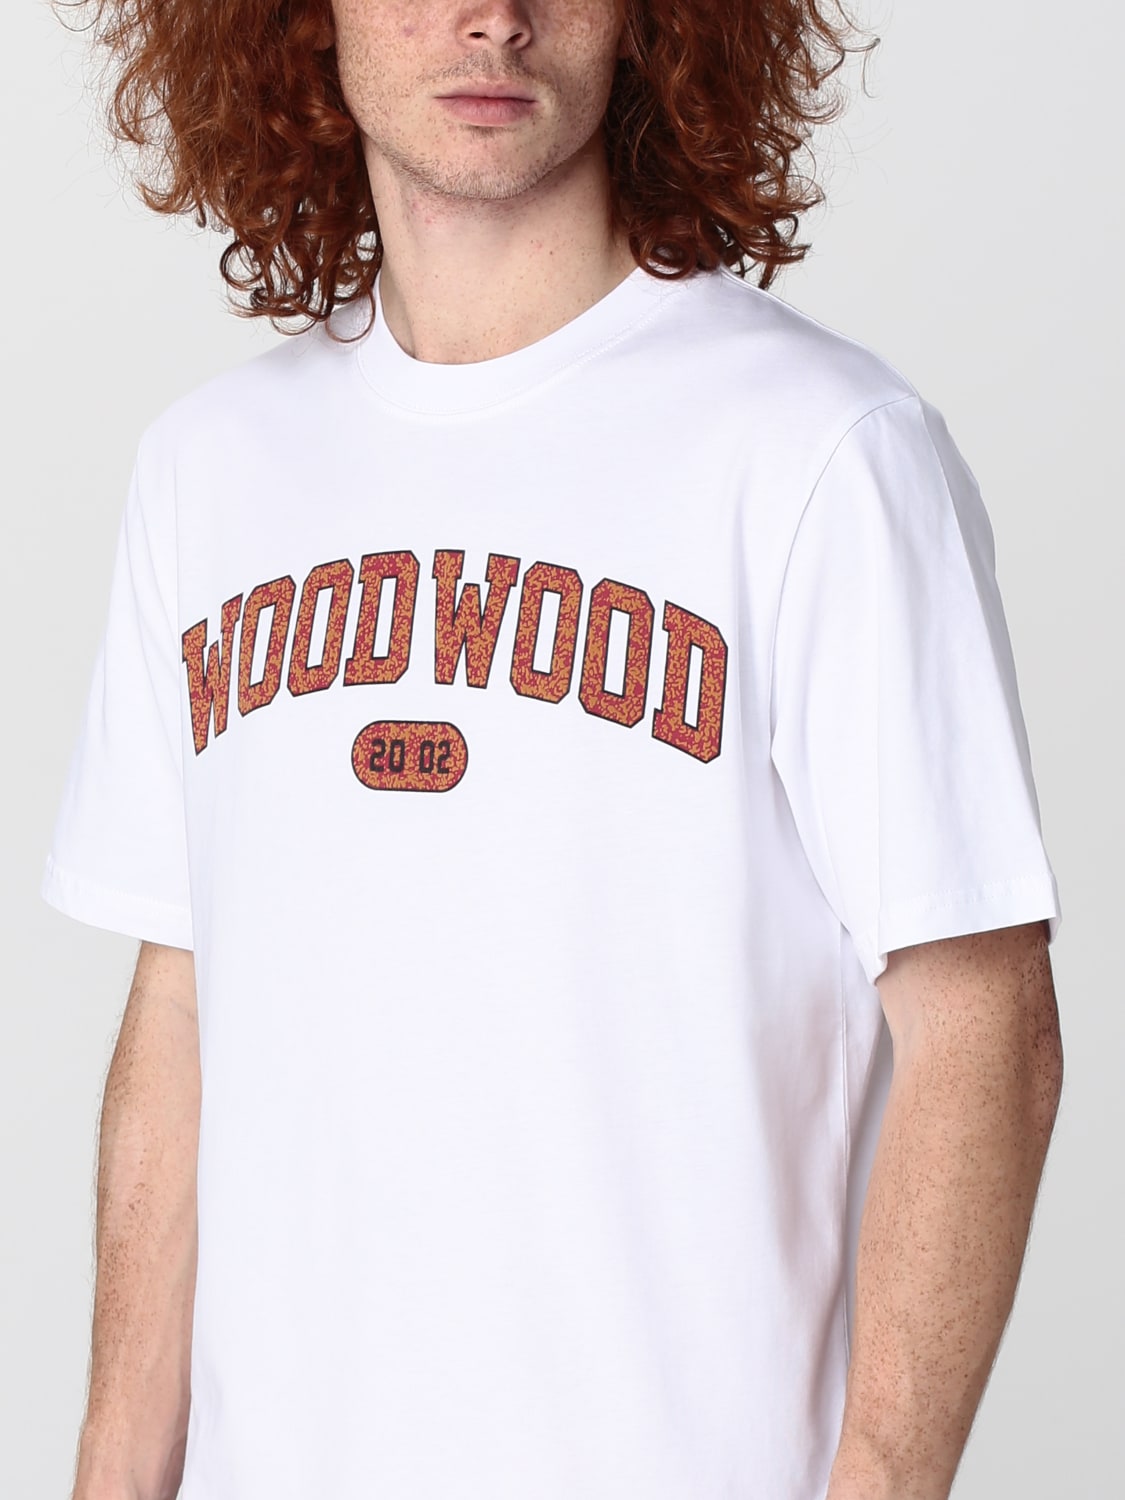 WOOD WOOD: t-shirt for man - White | Wood Wood 123157112489 online on GIGLIO.COM